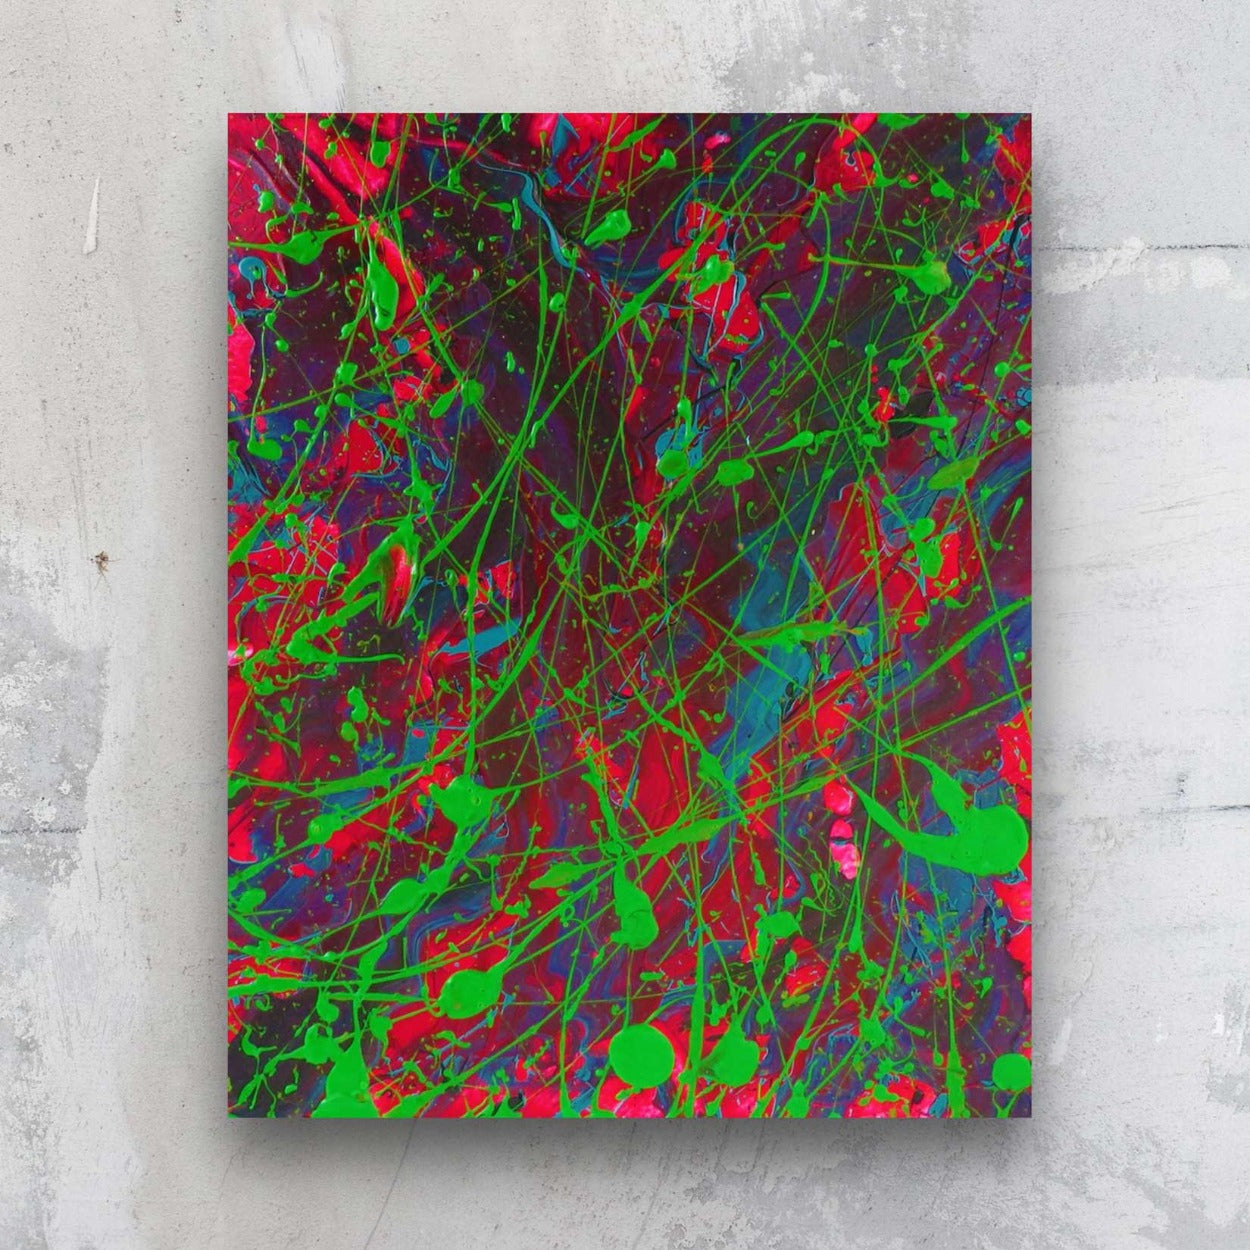 Little Luxuries XVI abstract art on paper in vibrant greens, neon pinks and teals by Brigdet Bradley. Seen against stone wall.